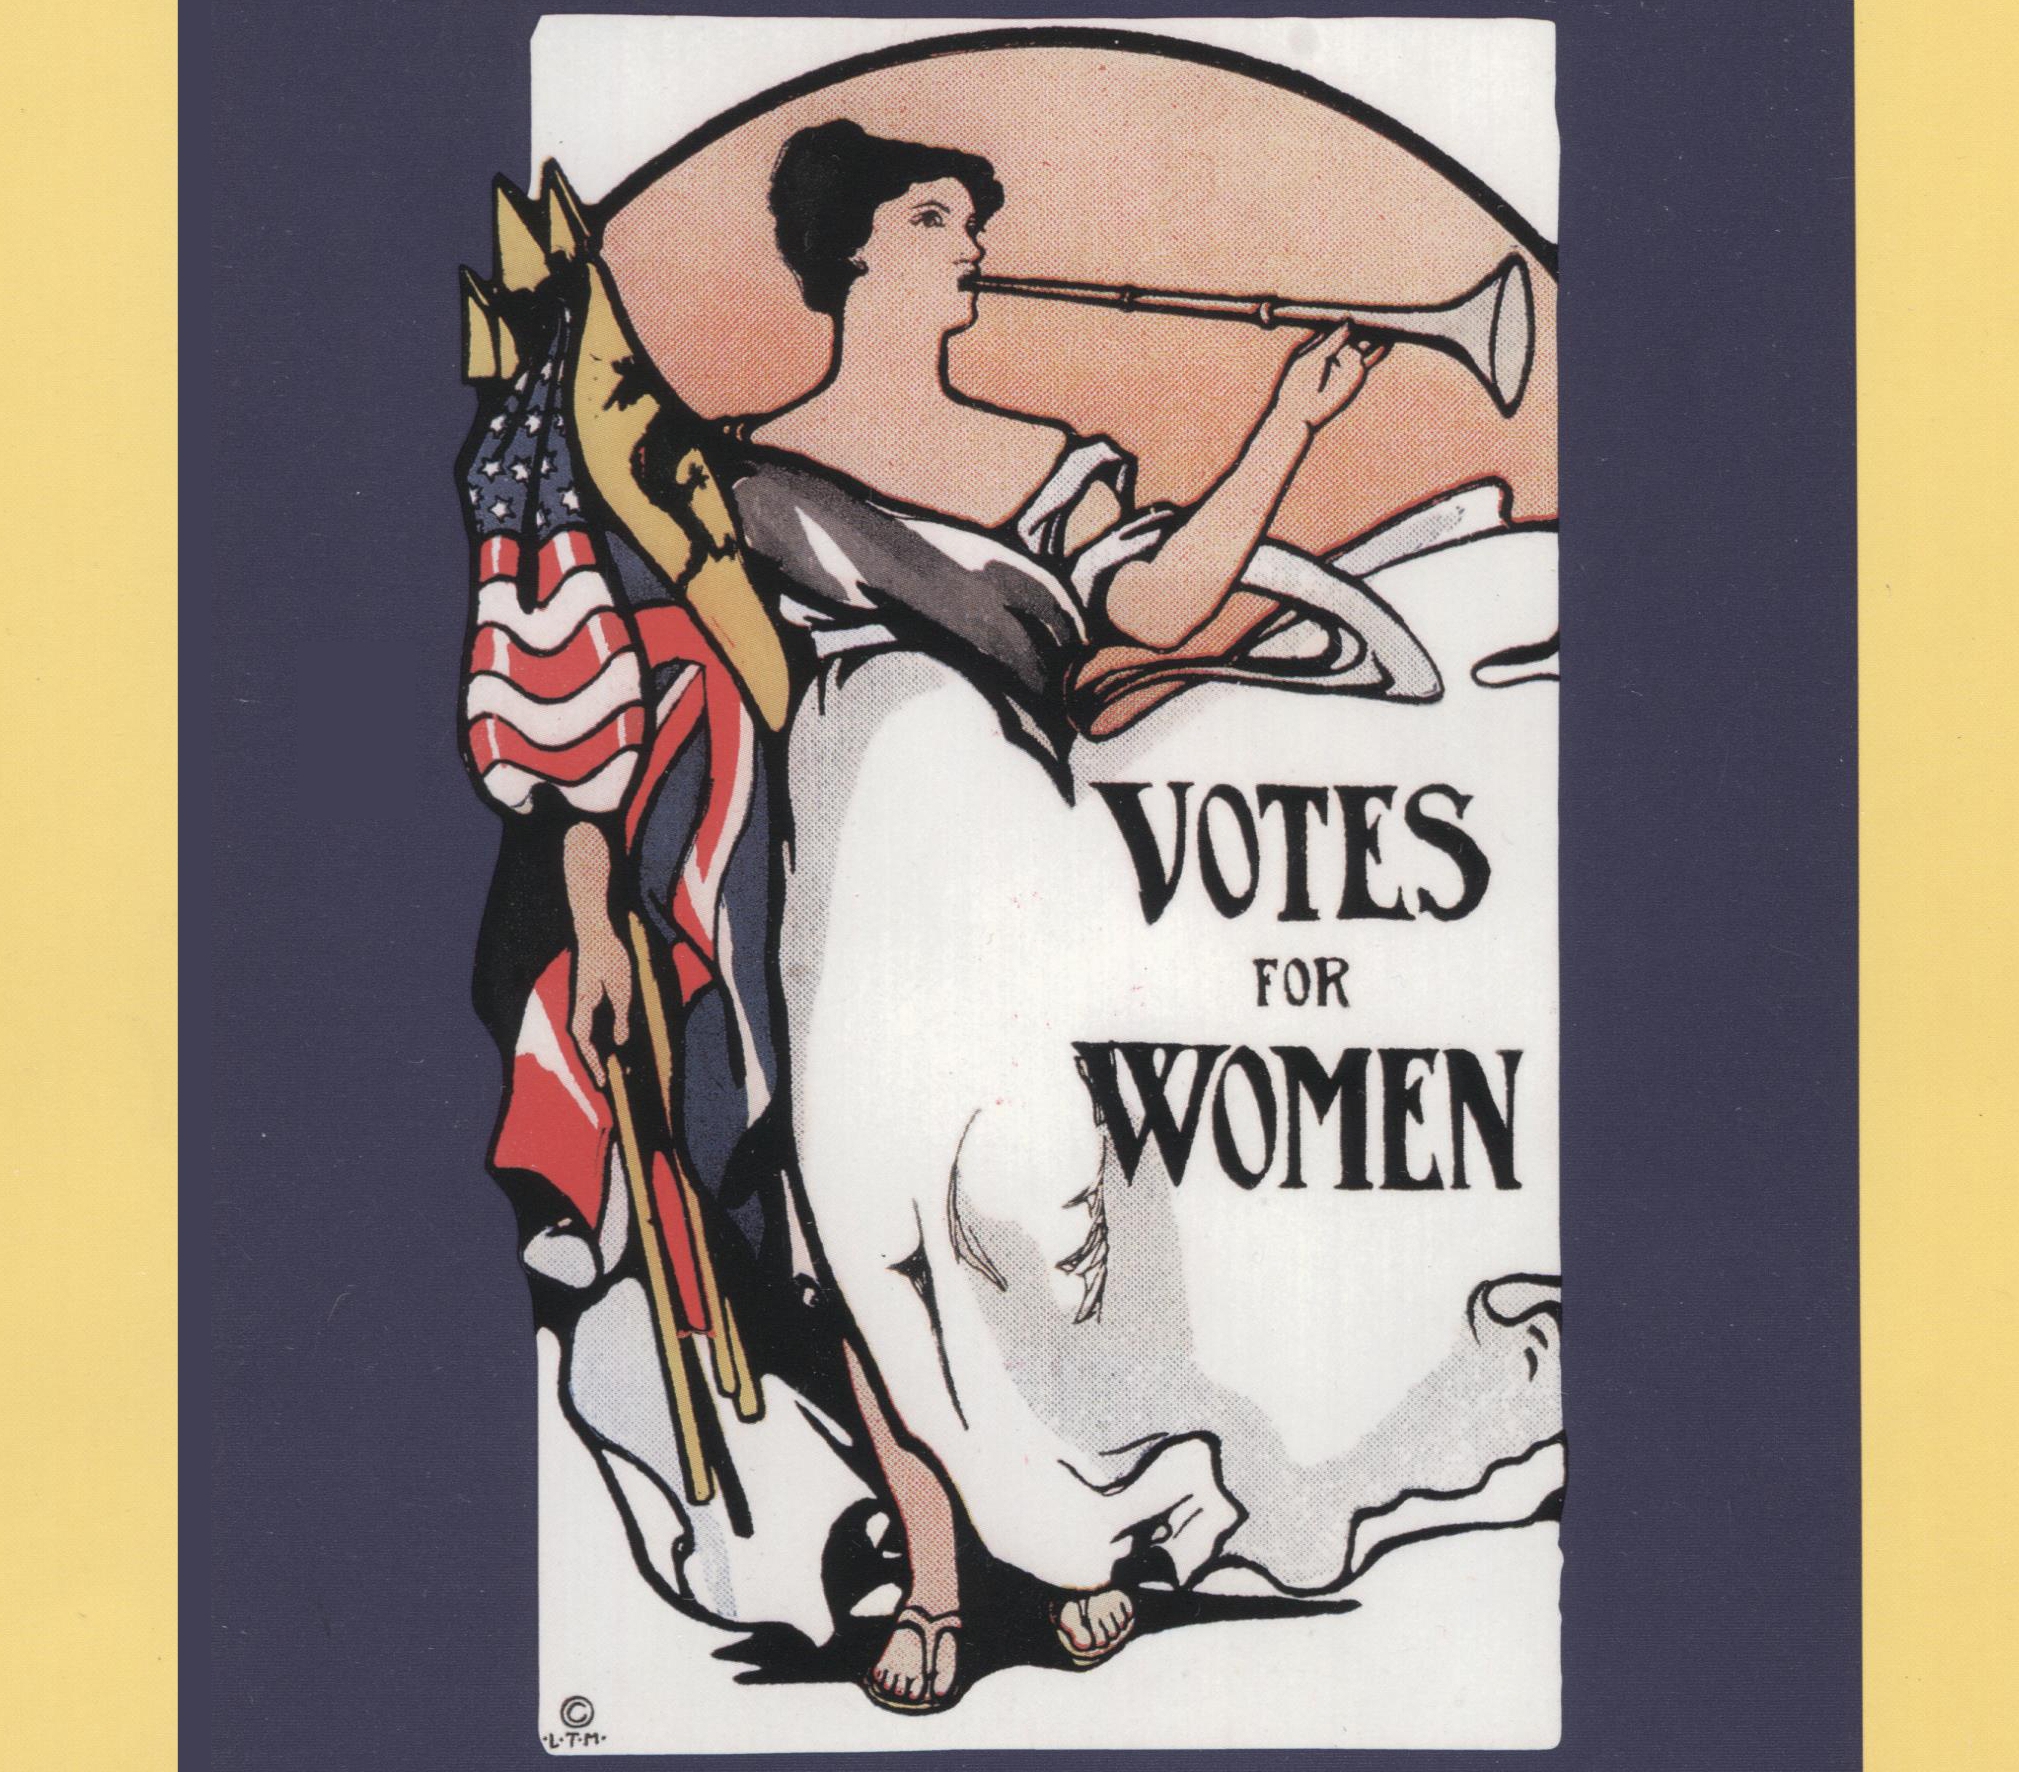 VOTES FOR WOMEN UNFINISHED BUSINESS